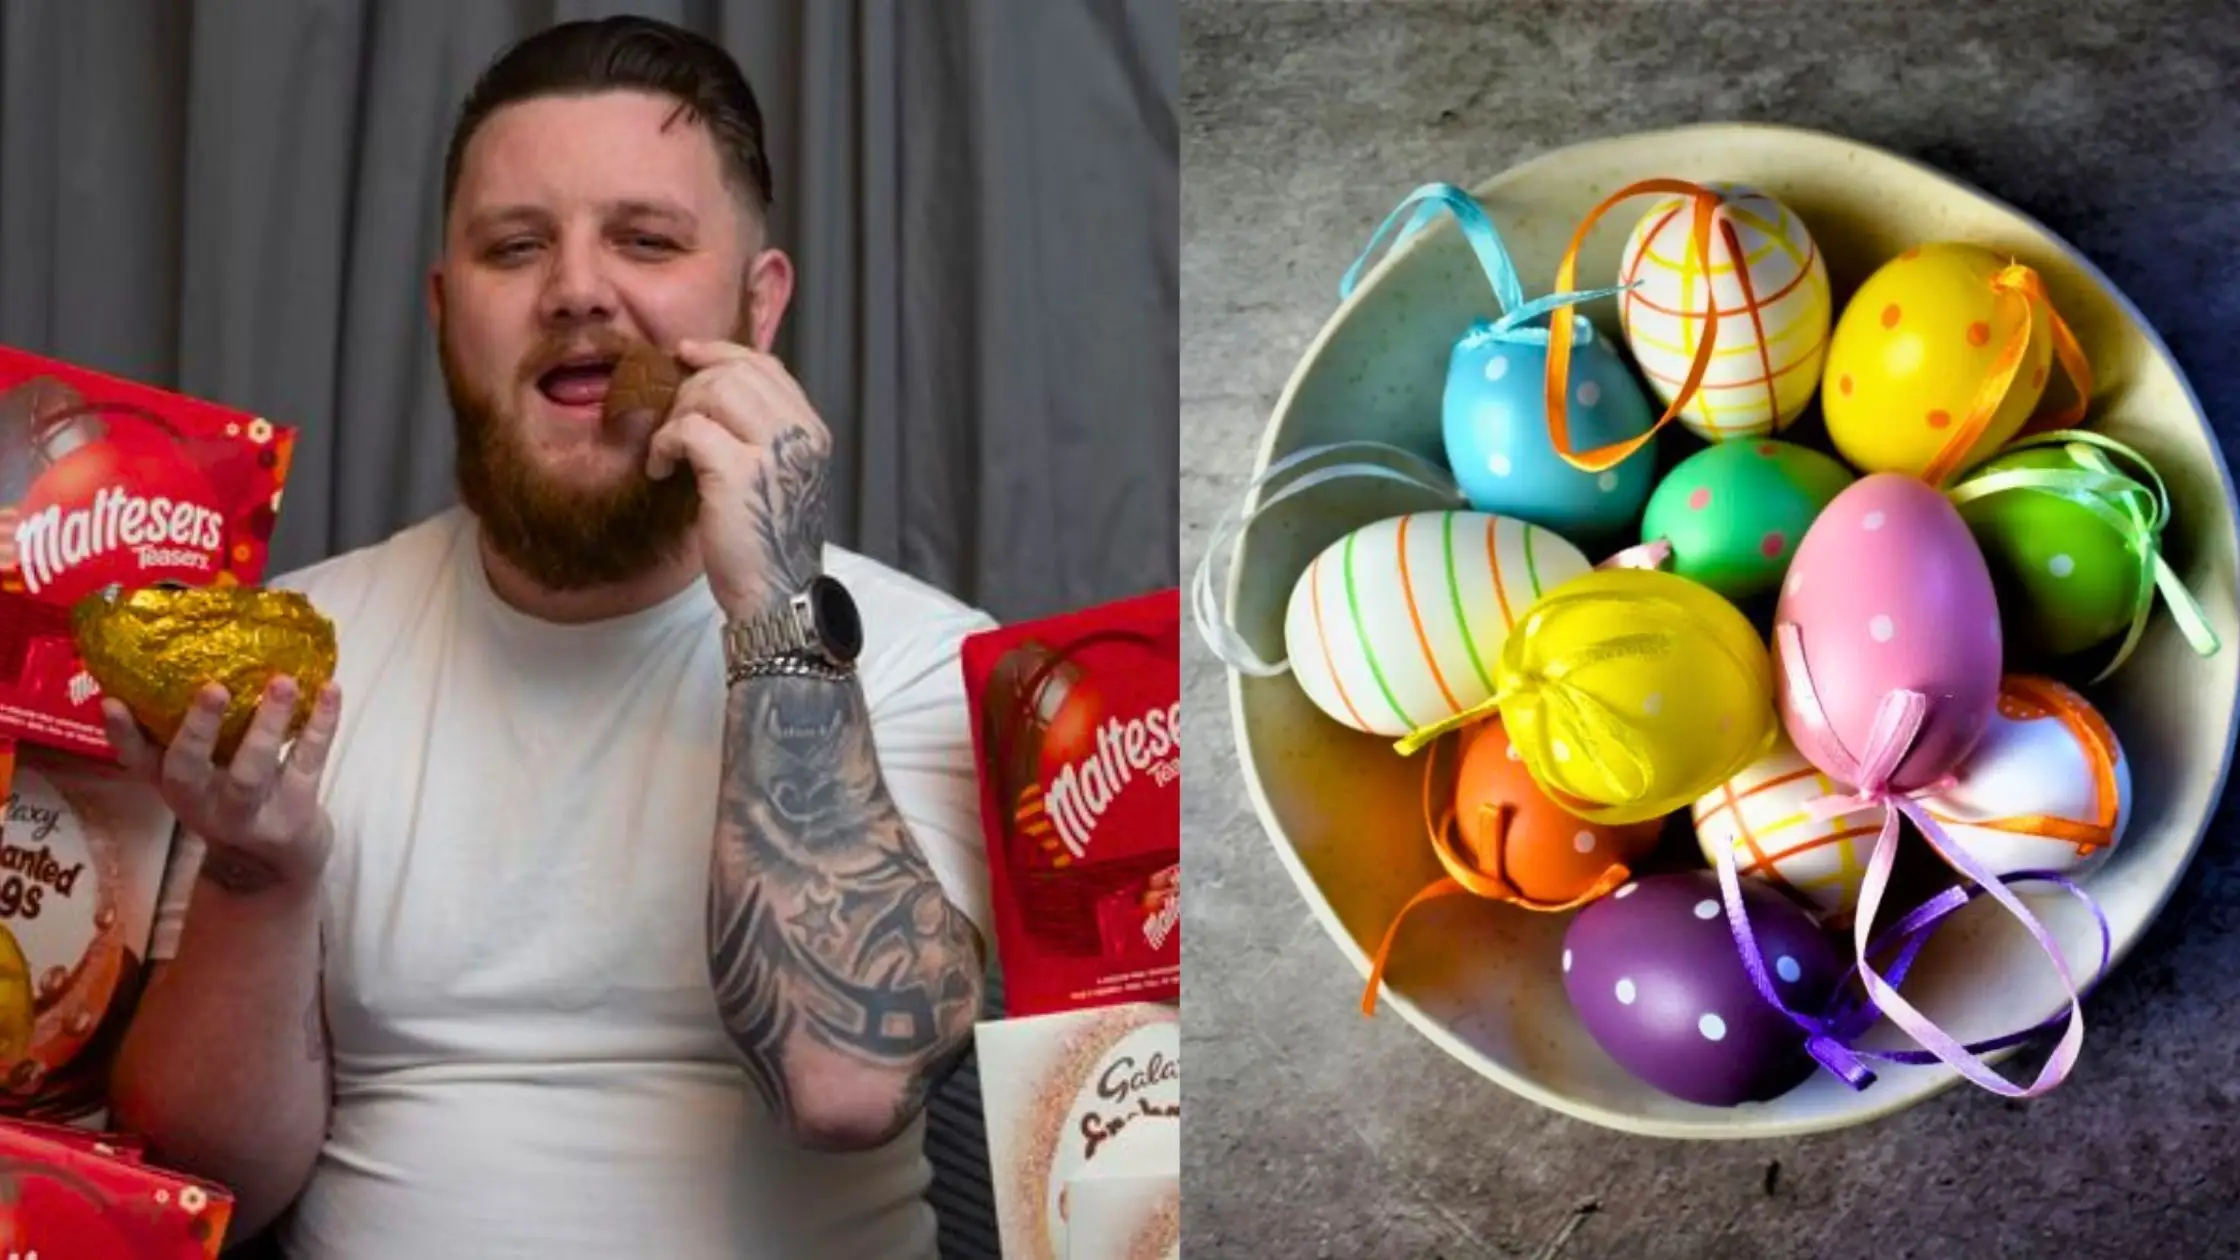 West Yorkshire Man Forced To Live On Easter Egg Diet